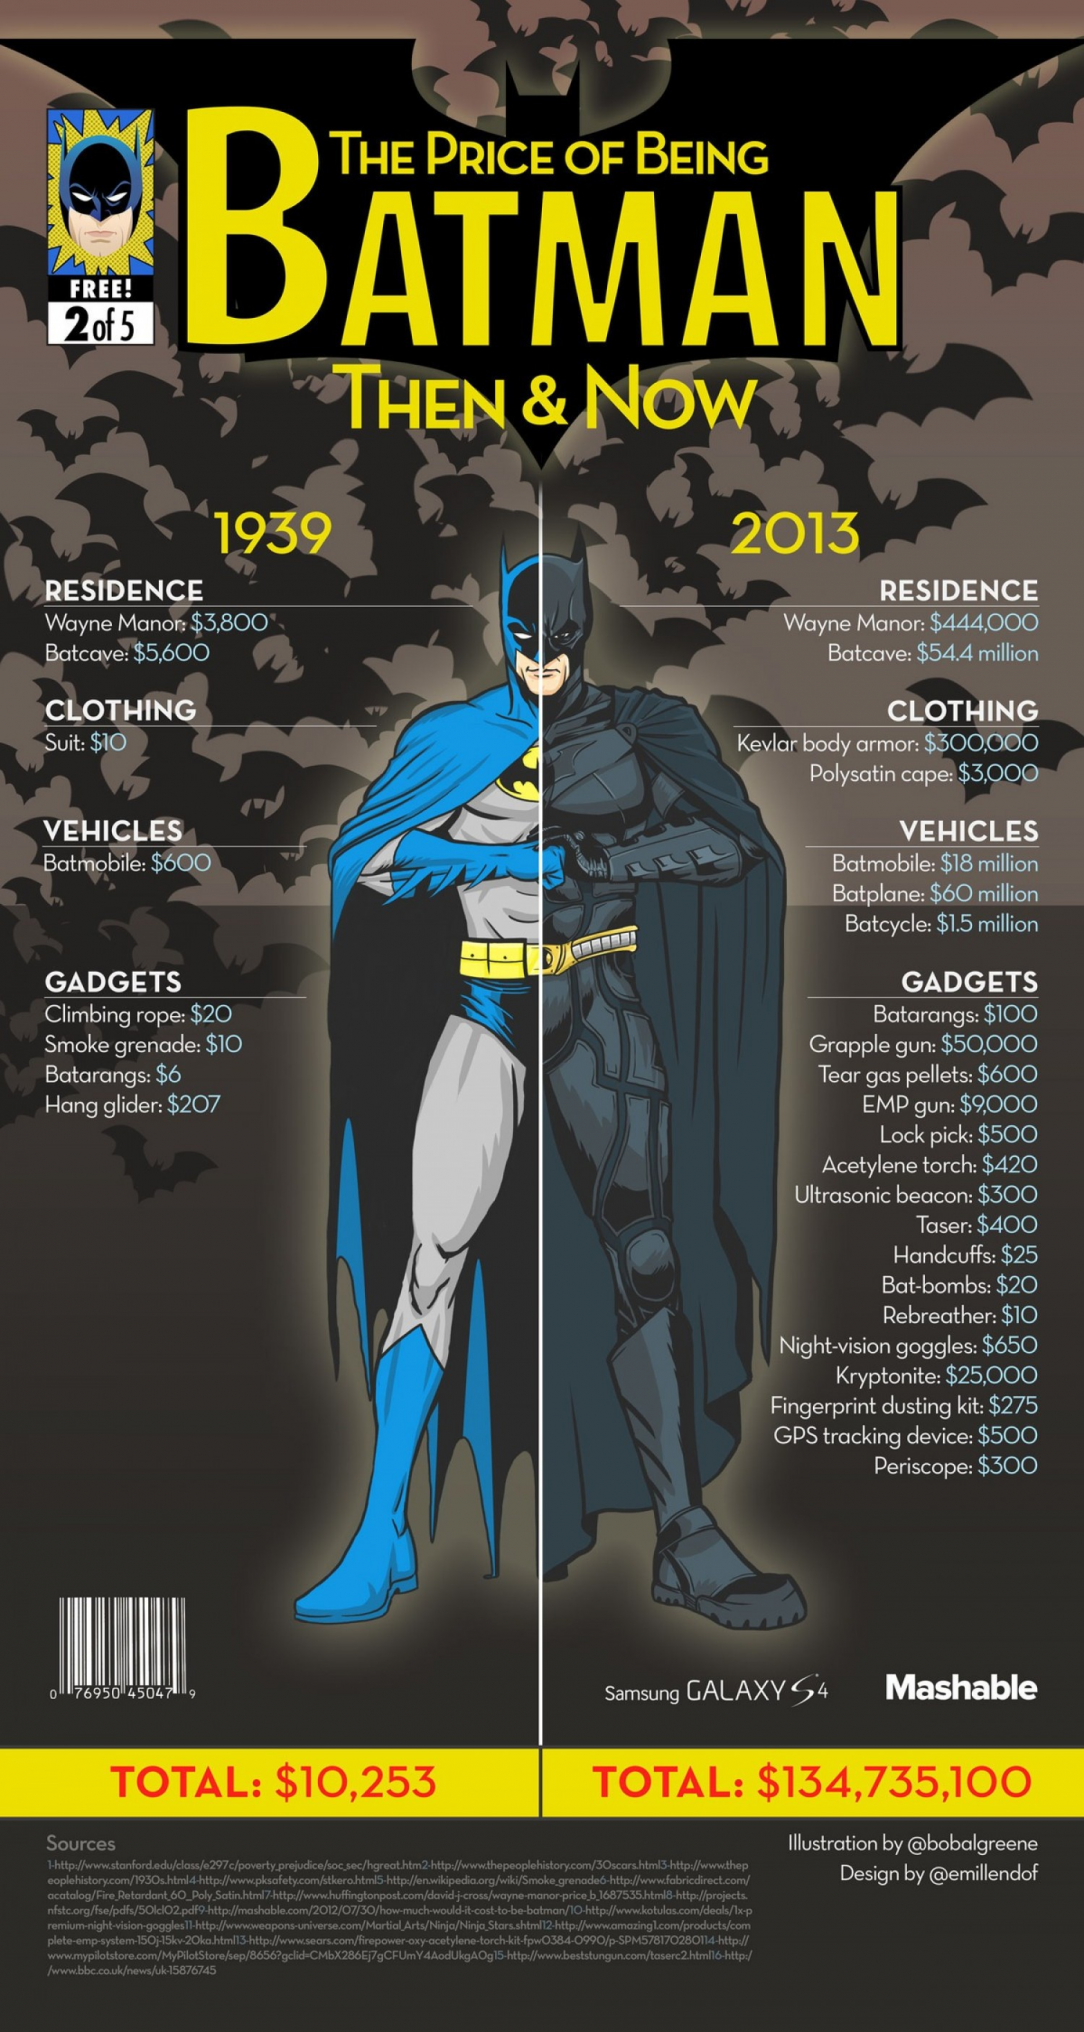 The price of being Batman, then and now